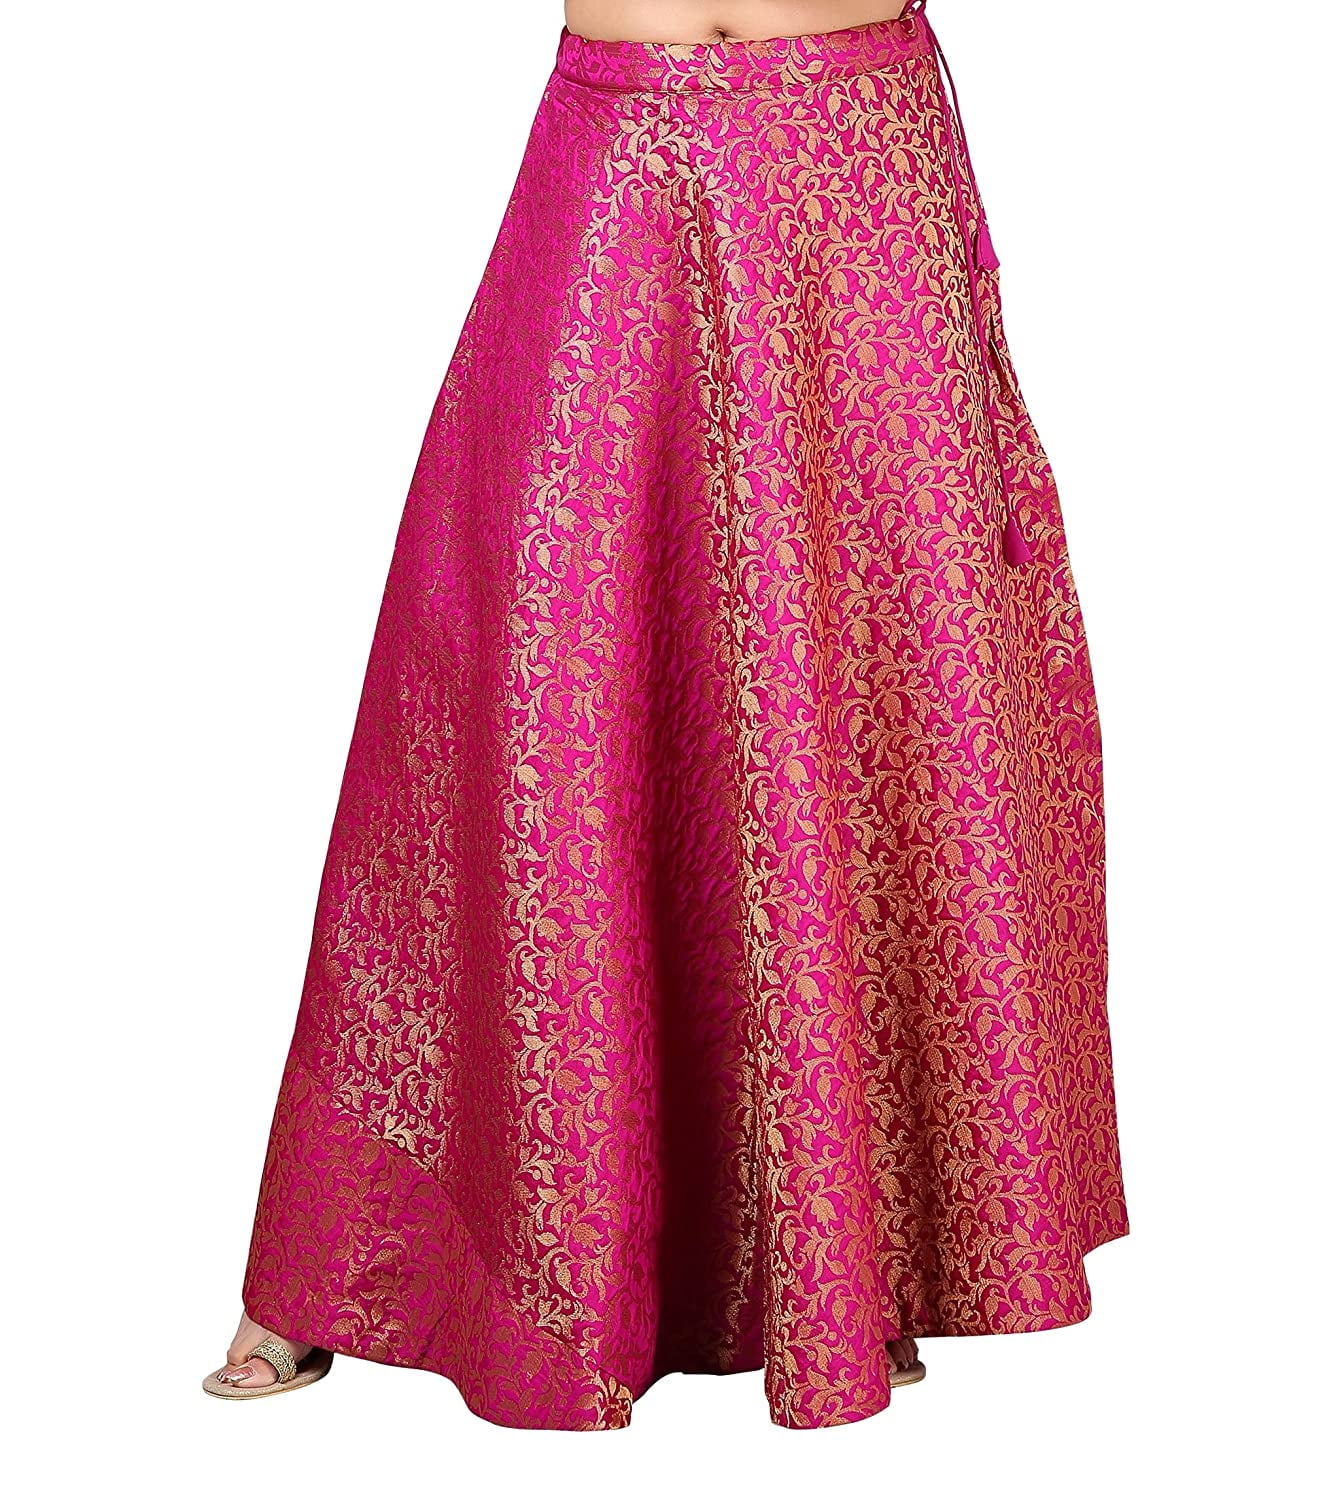 Aggregate more than 255 red long skirt online best